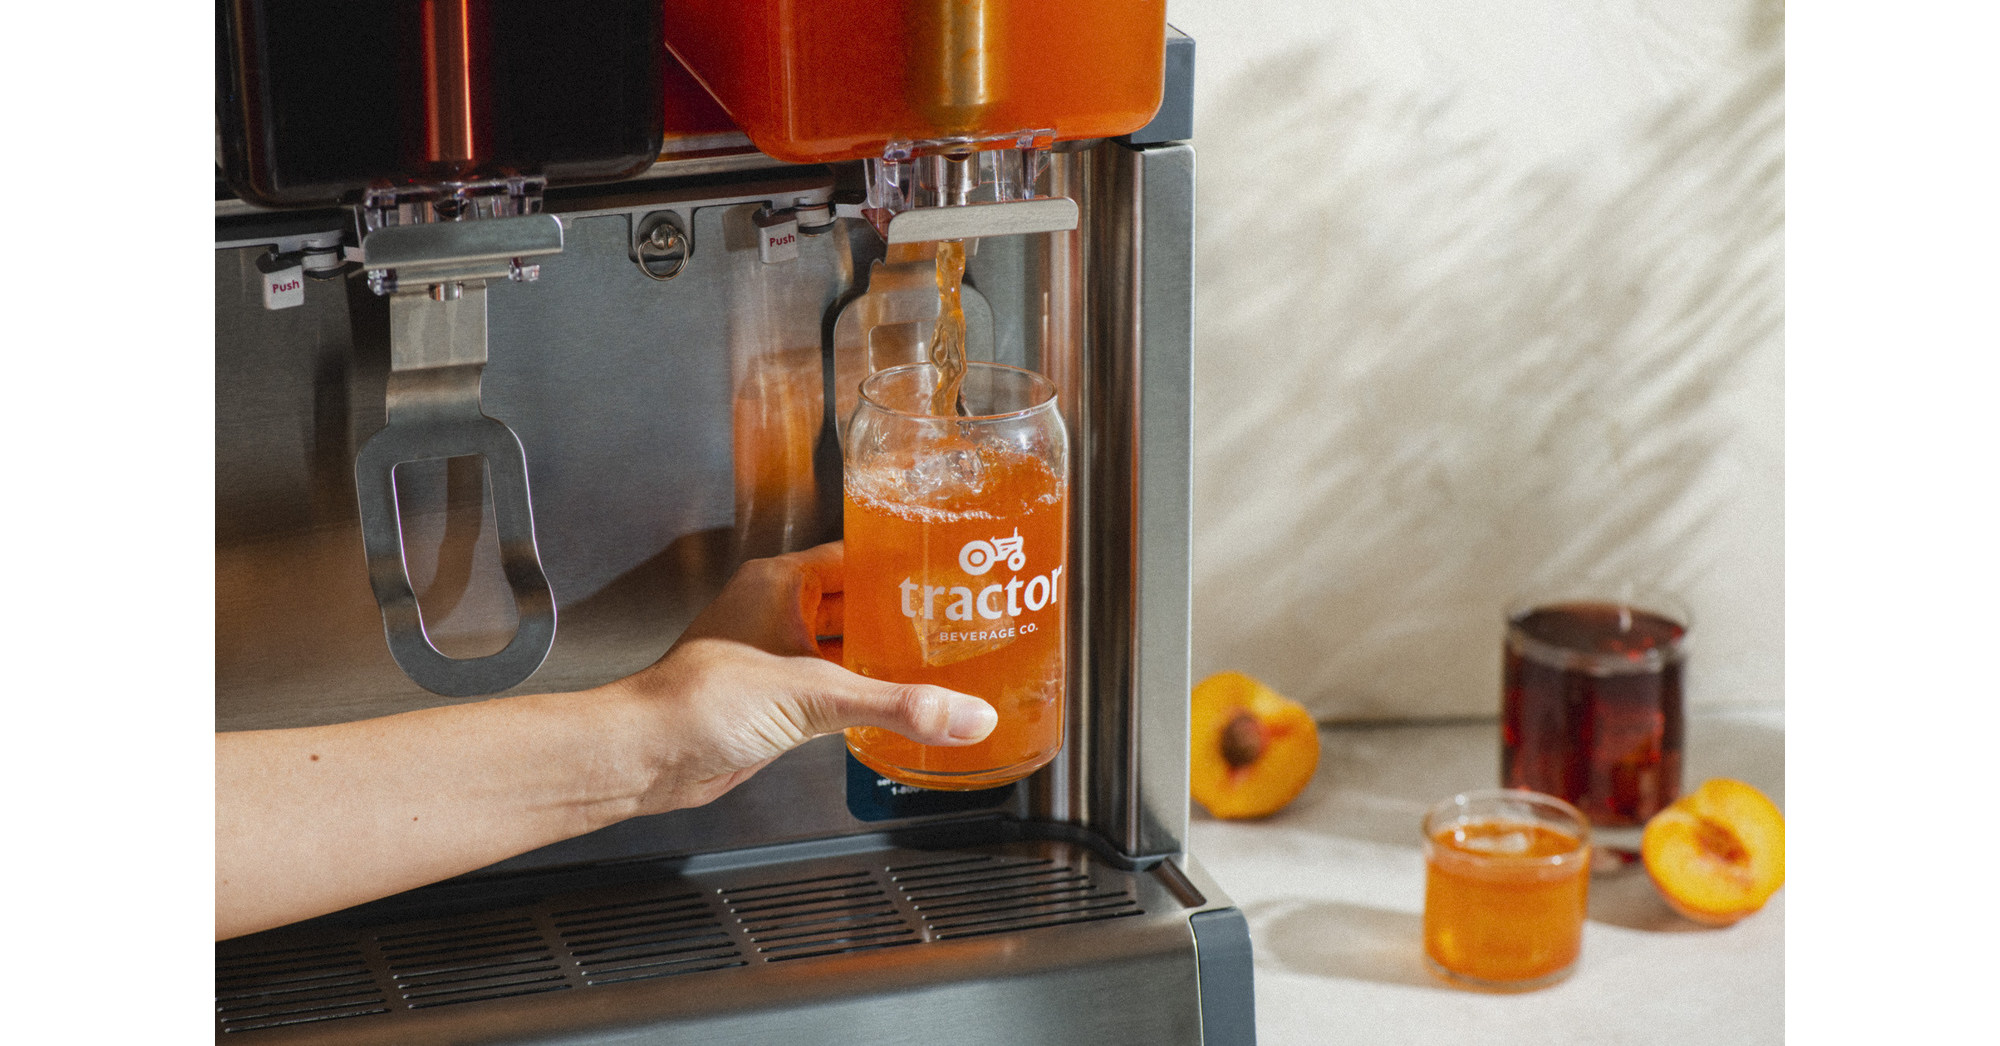 Keurig Aims to Lift Profits With Cold Drinks Machine - The New